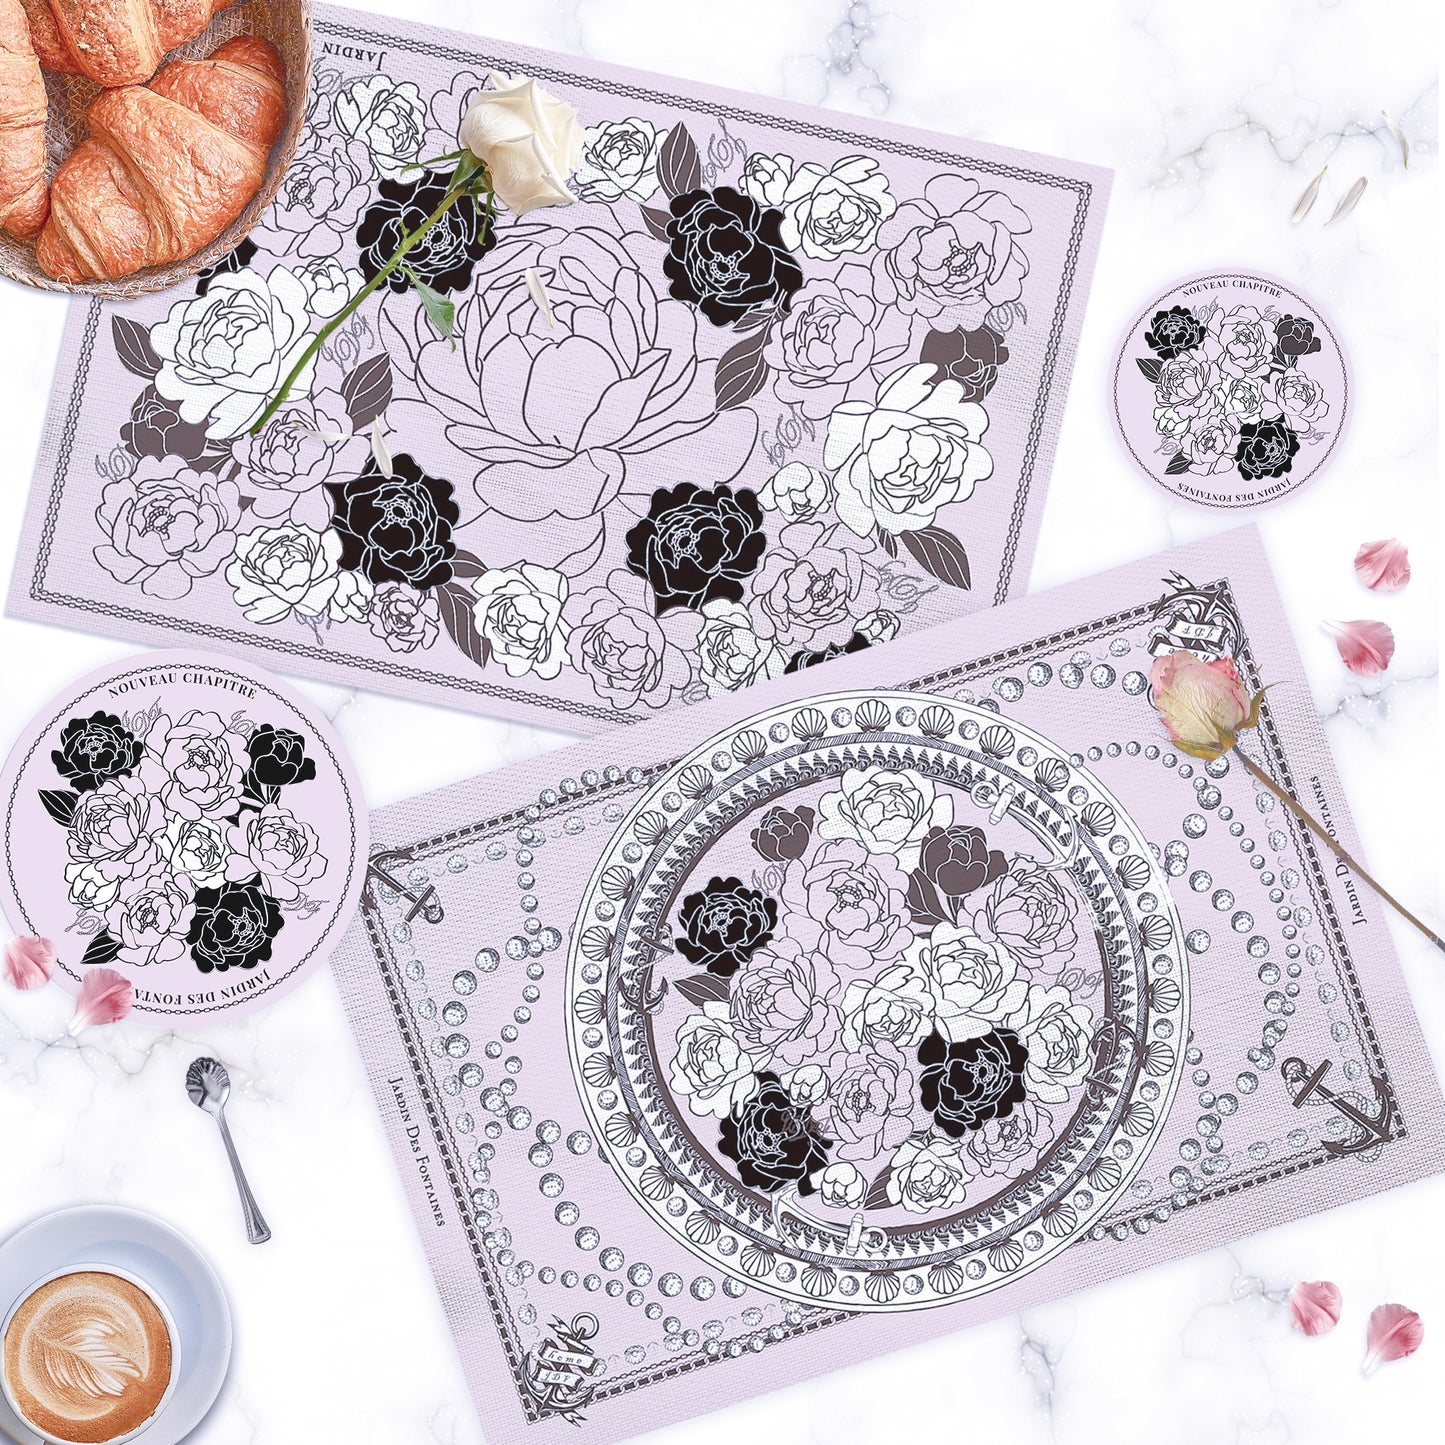 "Classy and Fabulous" Woven Table Placemat